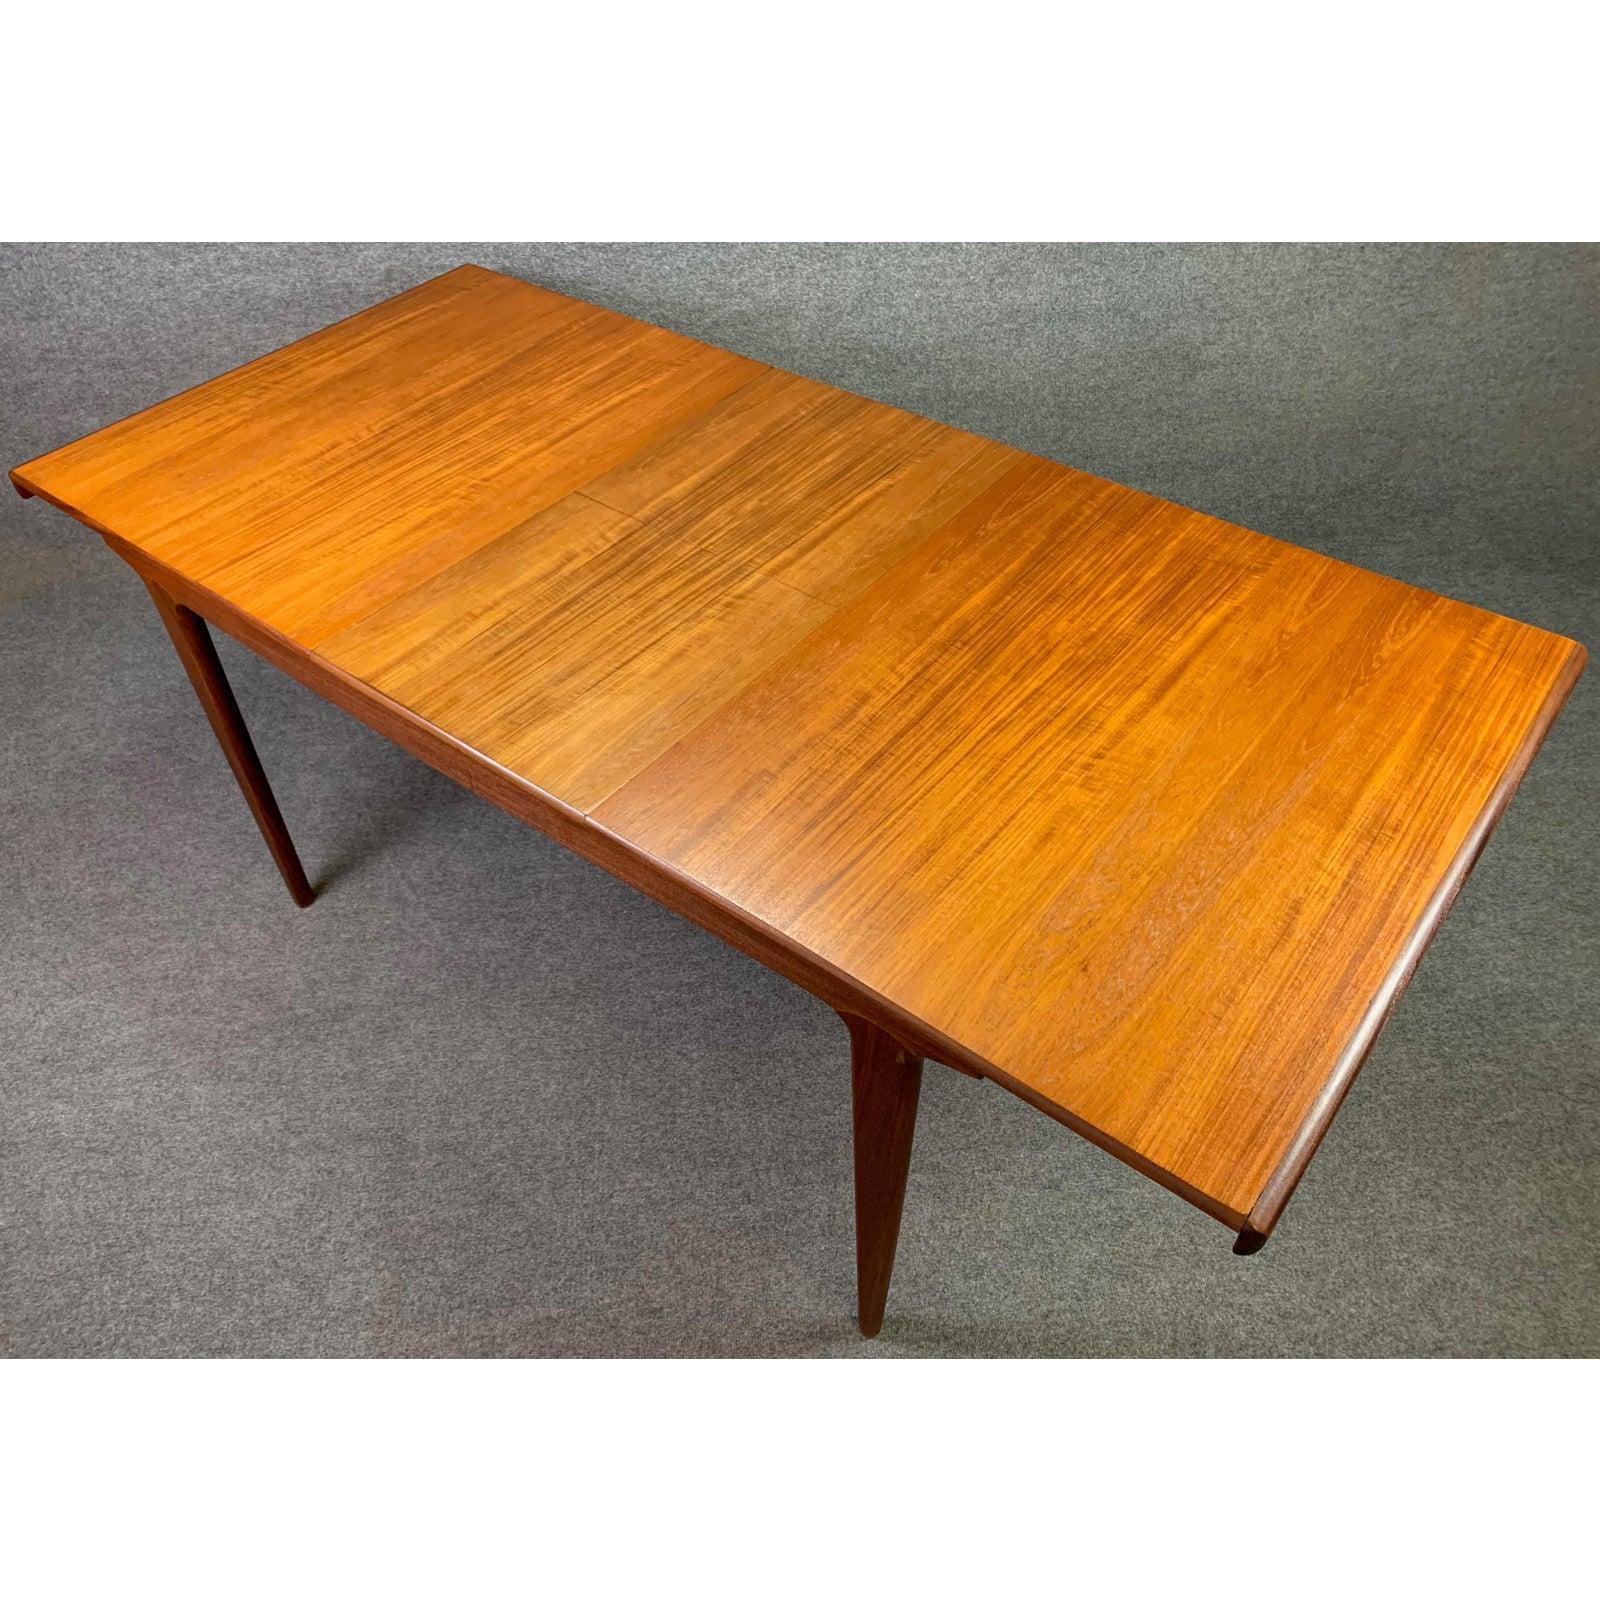 Mid-20th Century Vintage British Midcentury Teak Dining Table by John Herbert for A. Younger Ltd